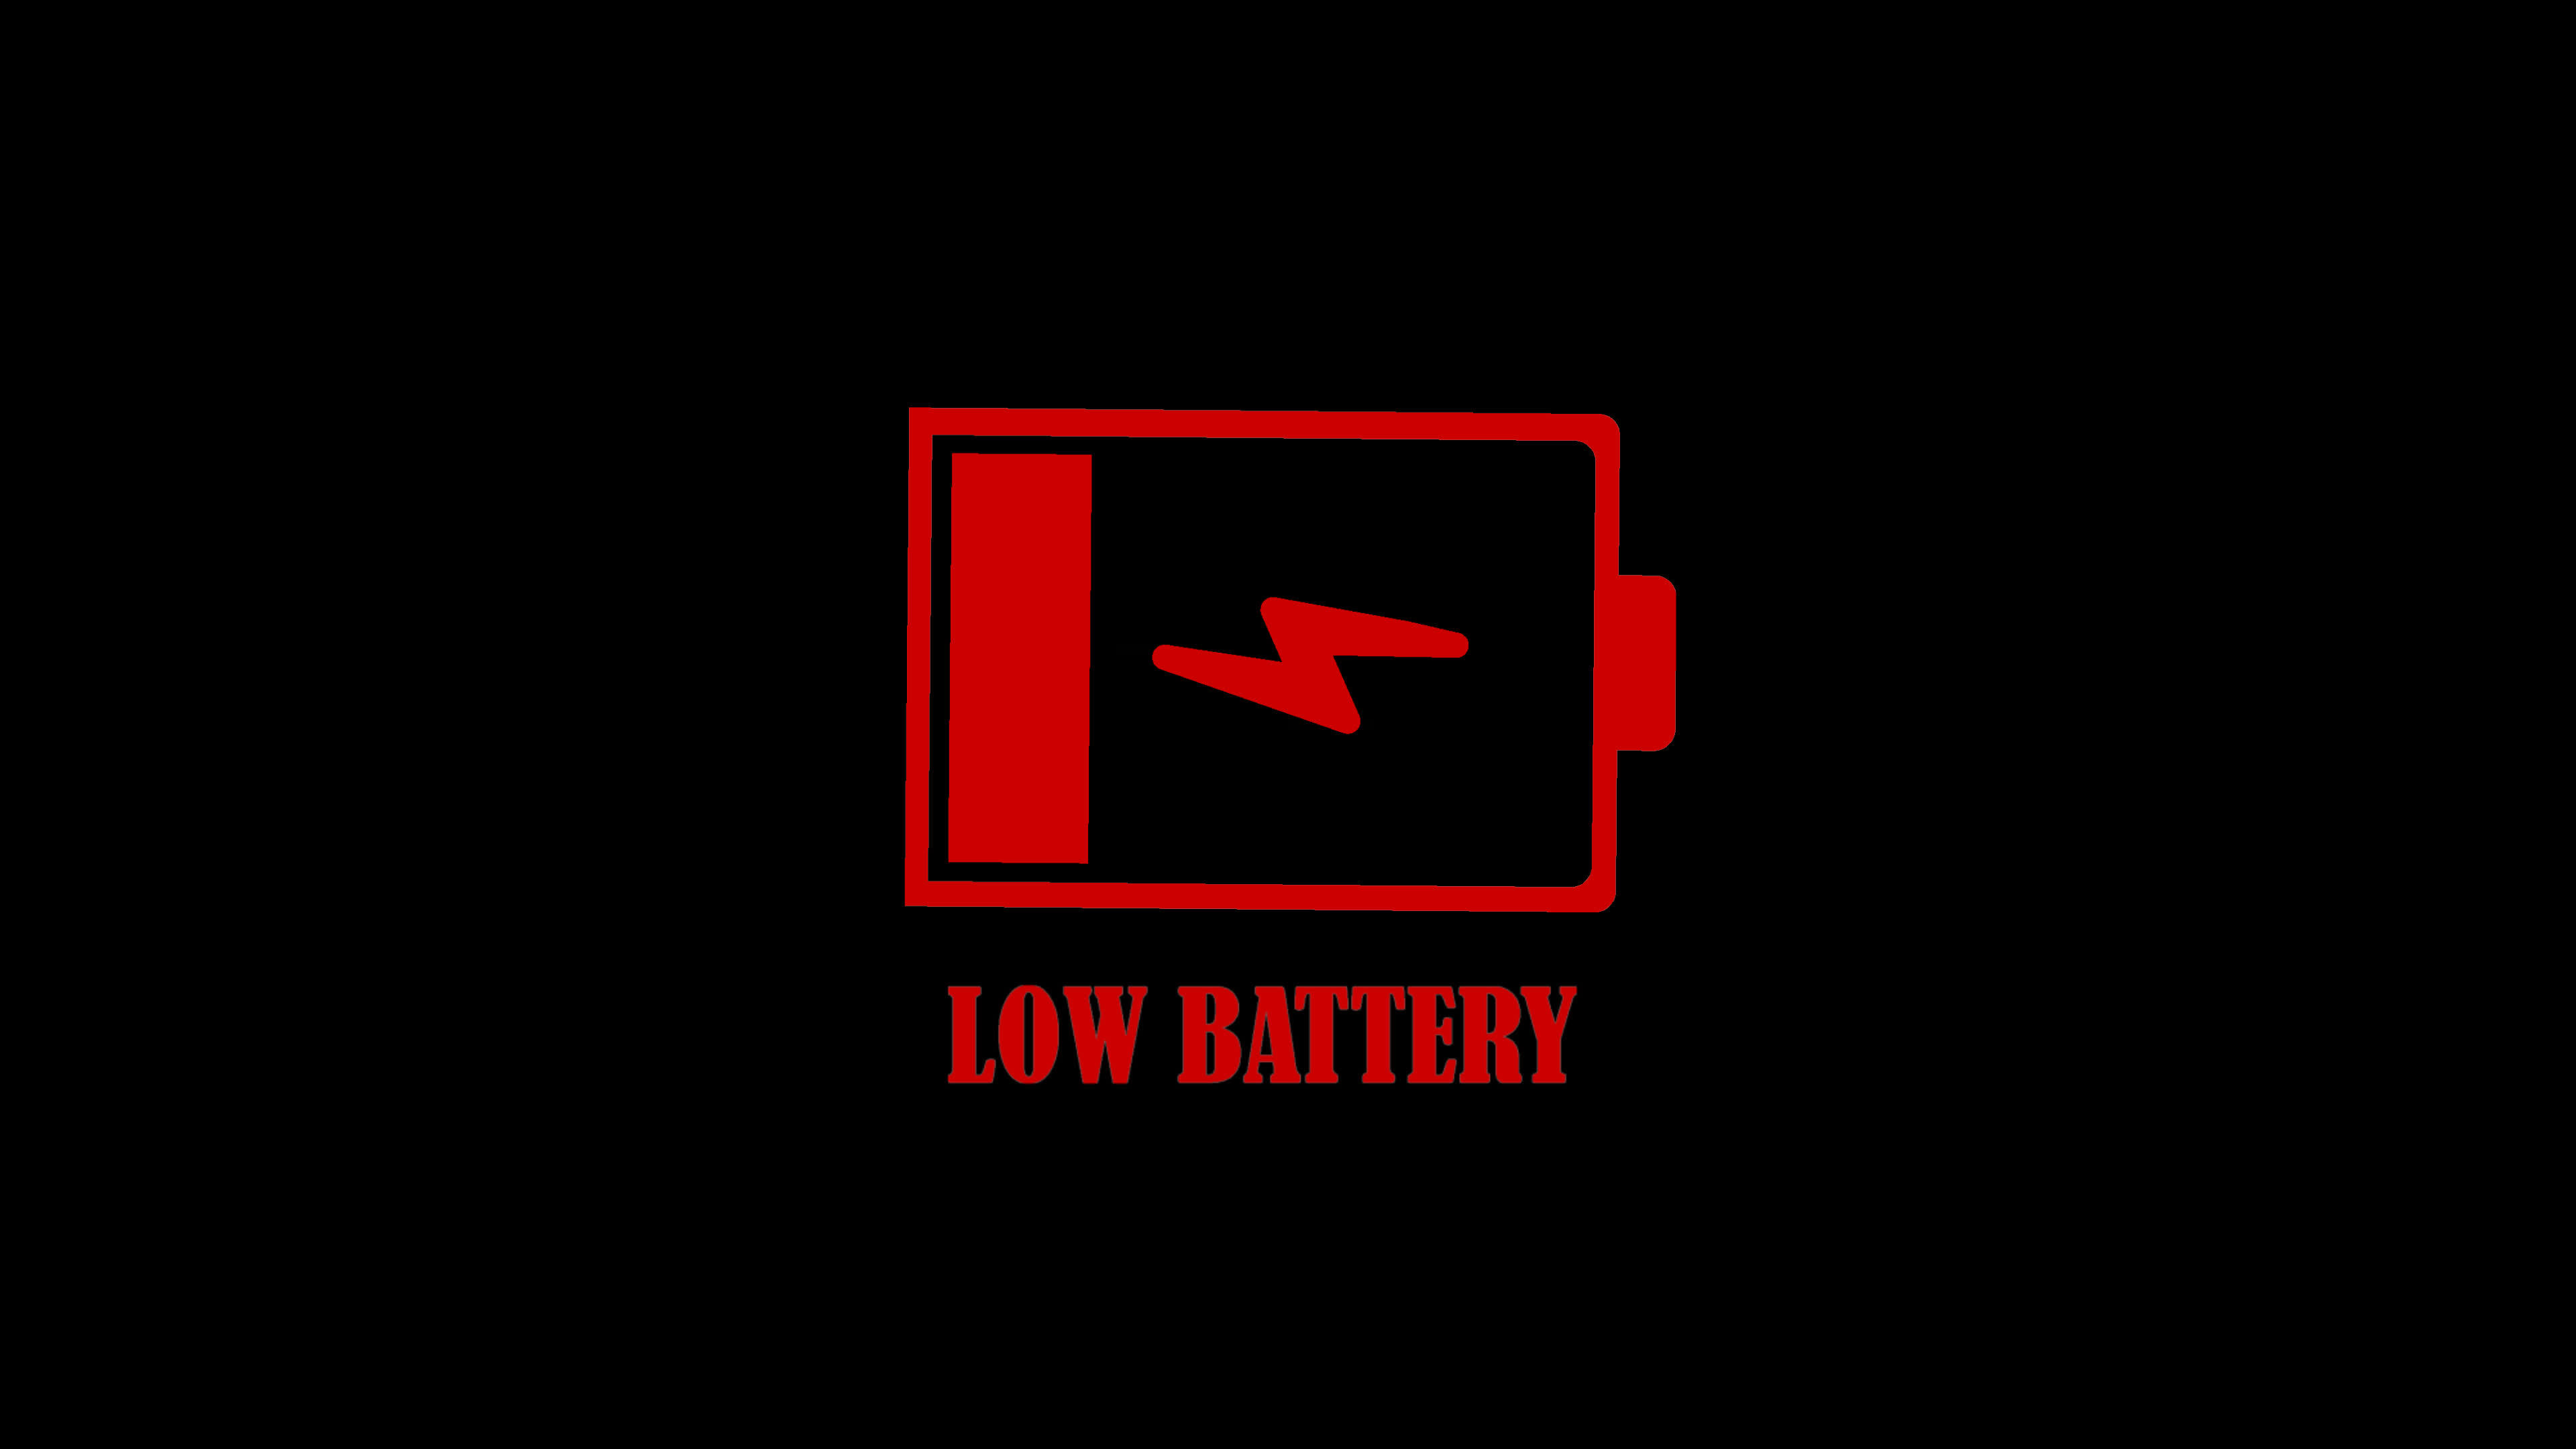 Low Battery Pictures  Download Free Images on Unsplash